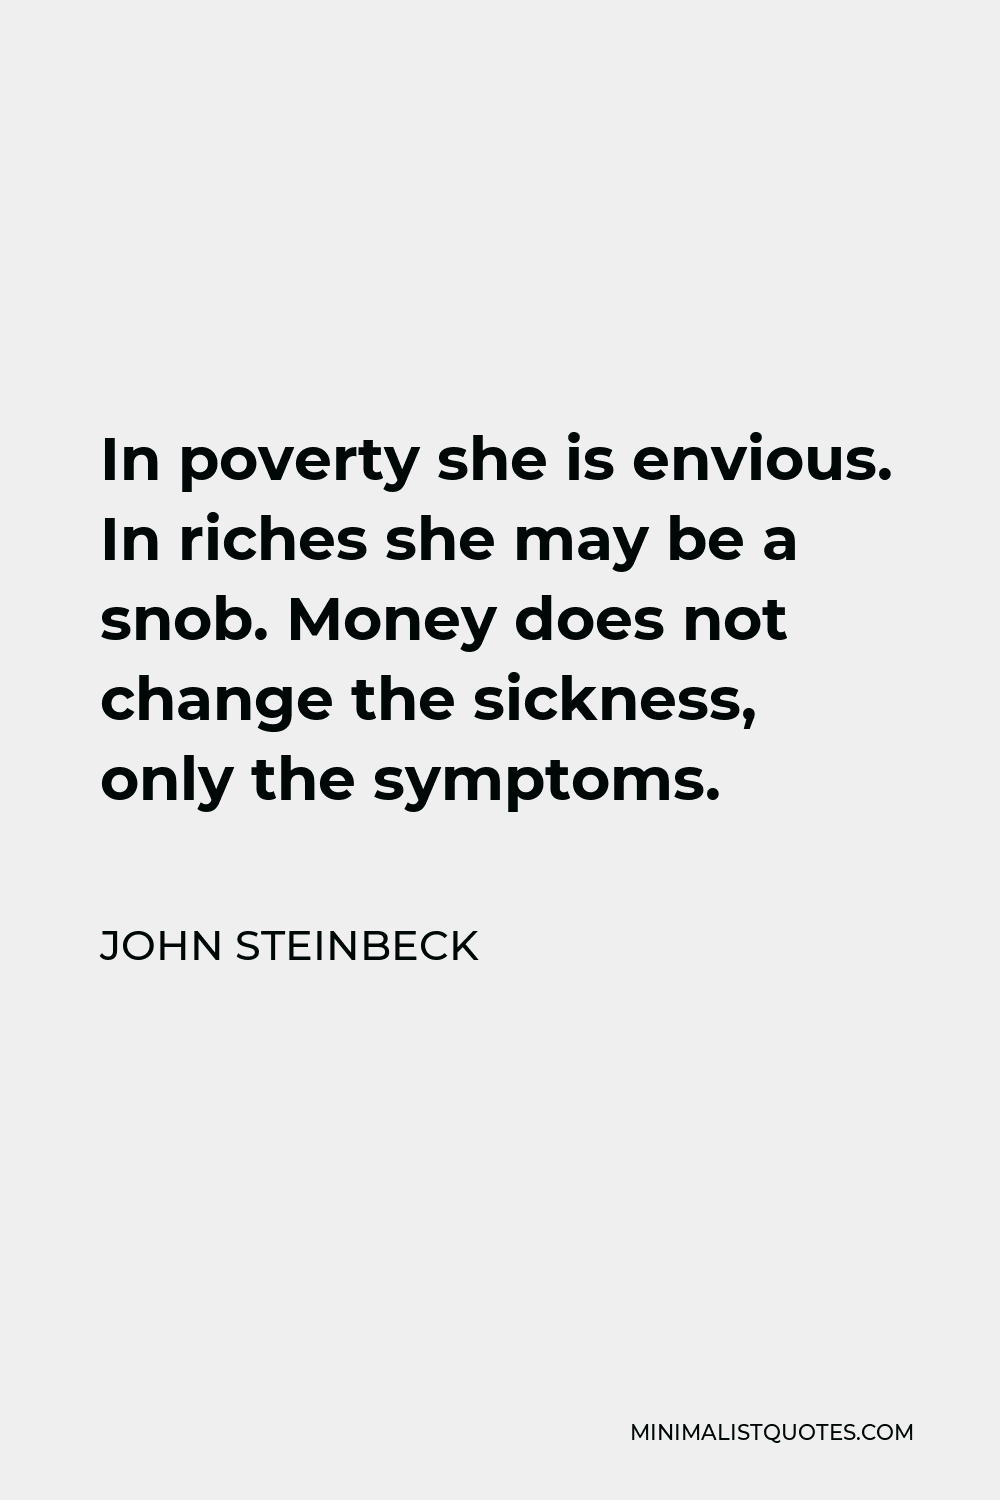 John Steinbeck Quote - In poverty she is envious. In riches she may be a snob. Money does not change the sickness, only the symptoms.